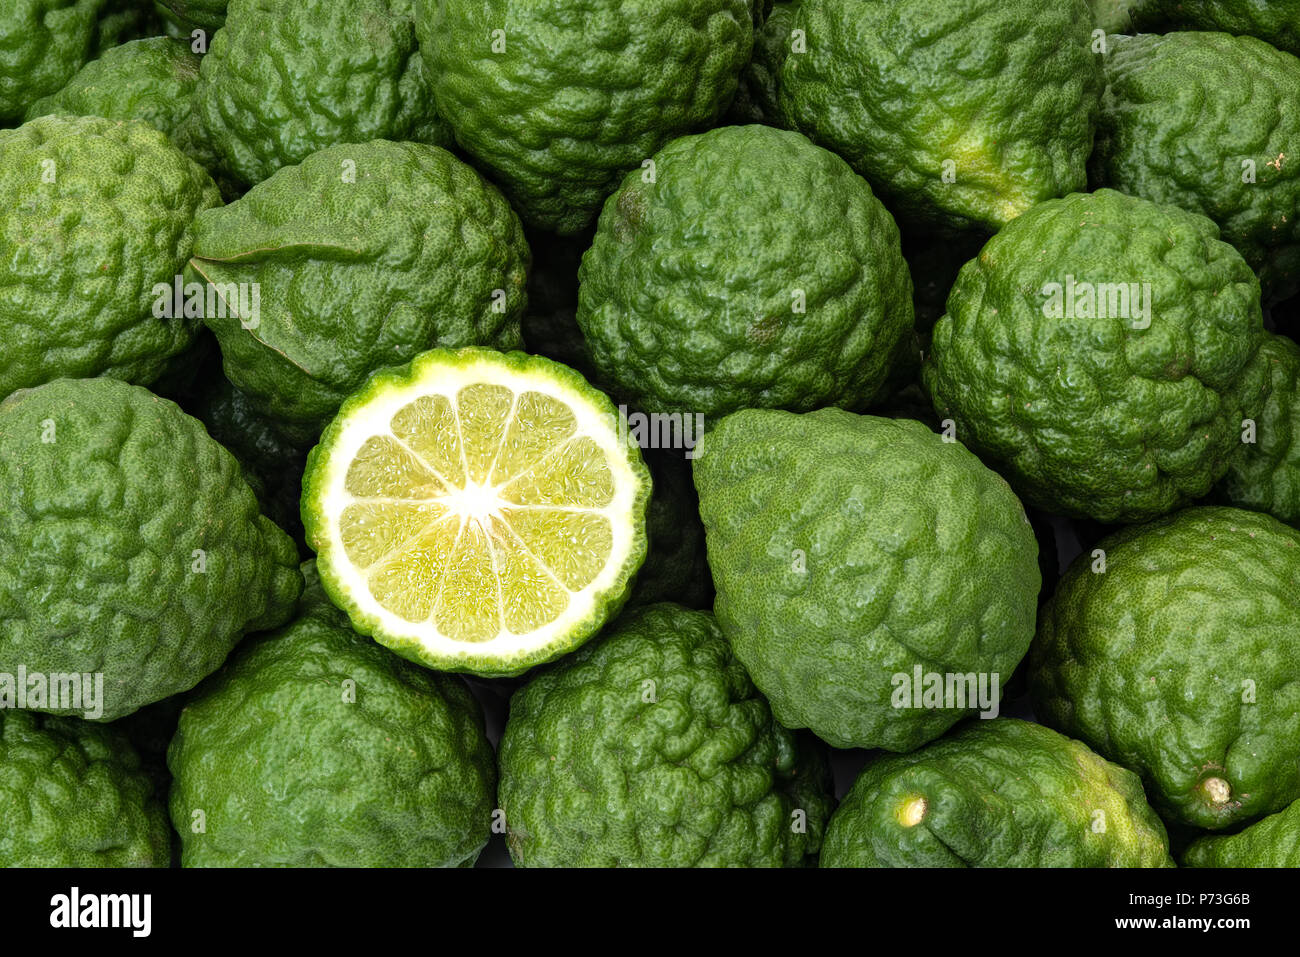 Kaffir limes, one cut citrus, ingredient for health and beauty products Stock Photo